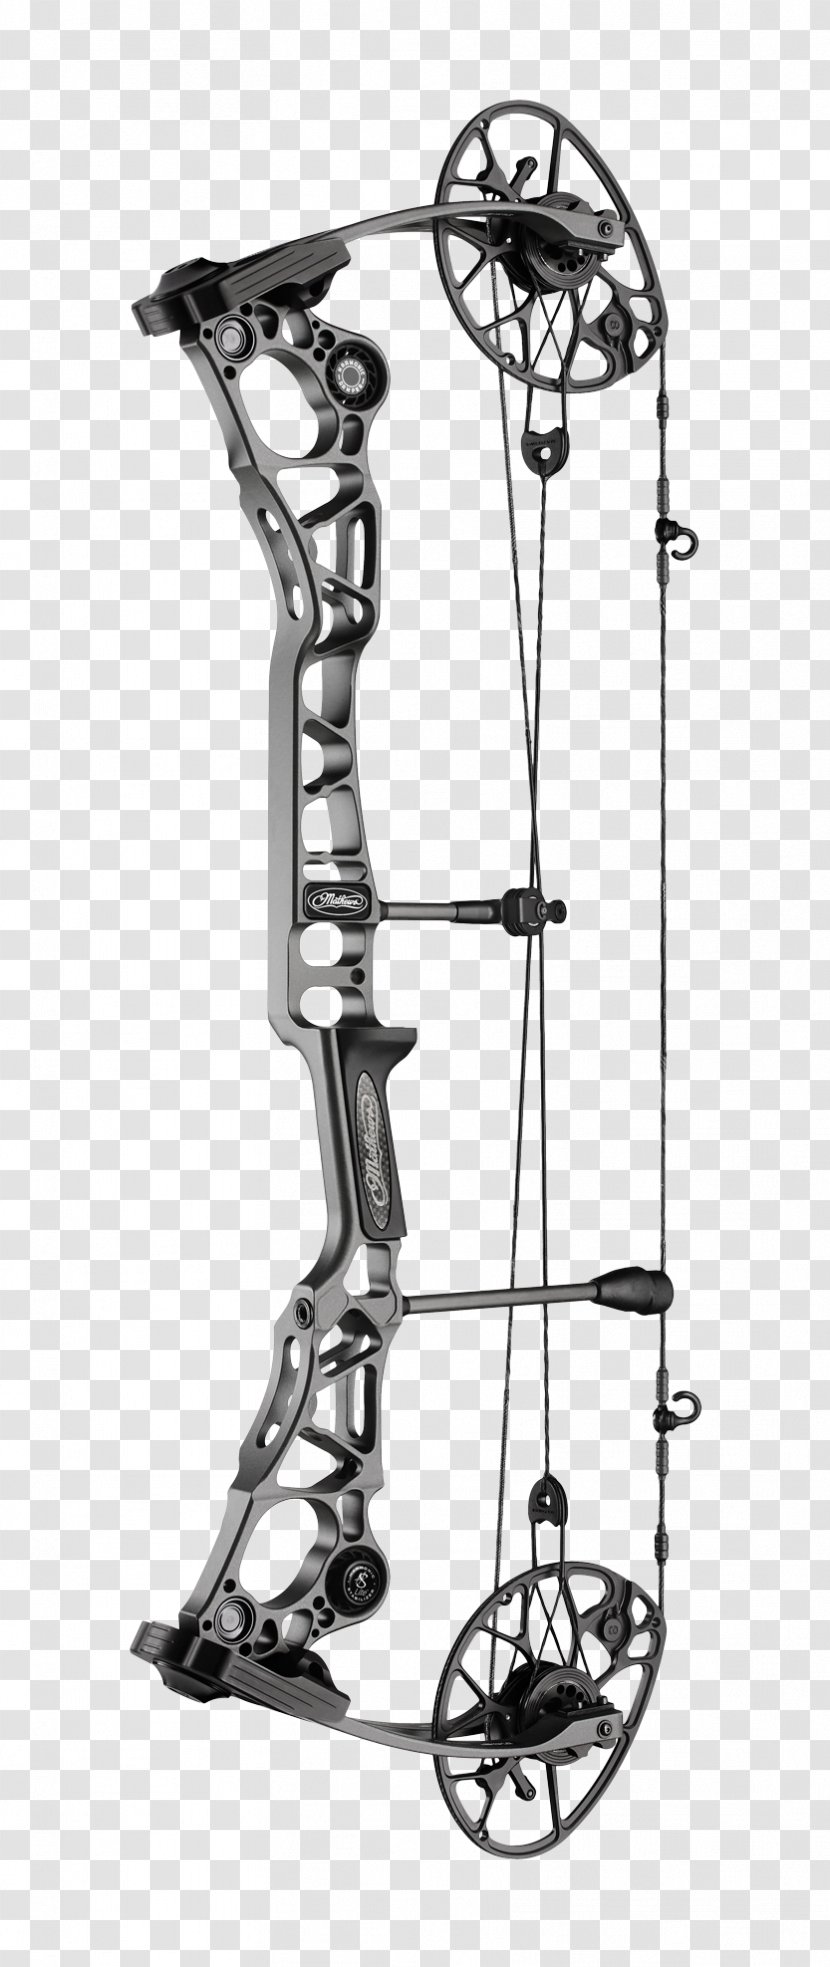 Compound Bows Bow And Arrow Archery Bowhunting - Flower - Puppies Transparent PNG